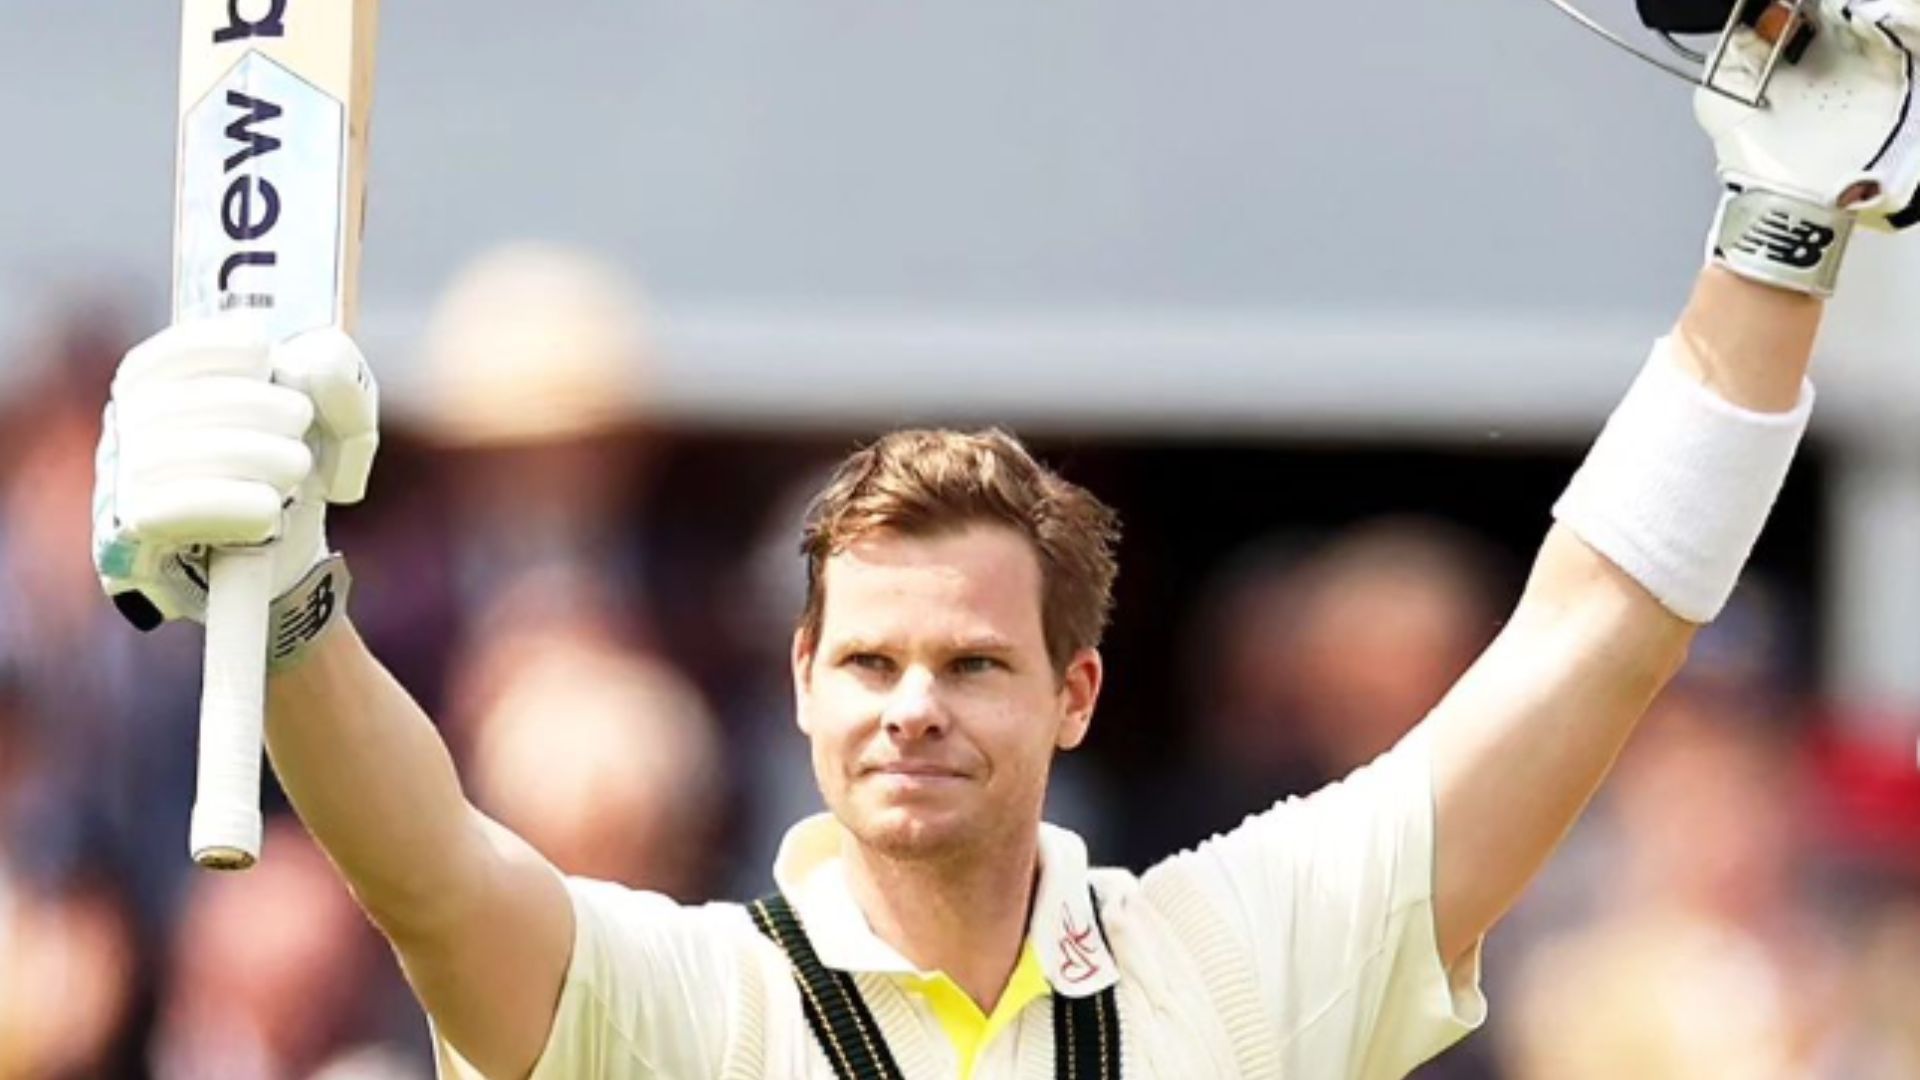 Steve Smith celebrates after reachin his 32nd Test hundred (P.C.: Wide World of Sports)